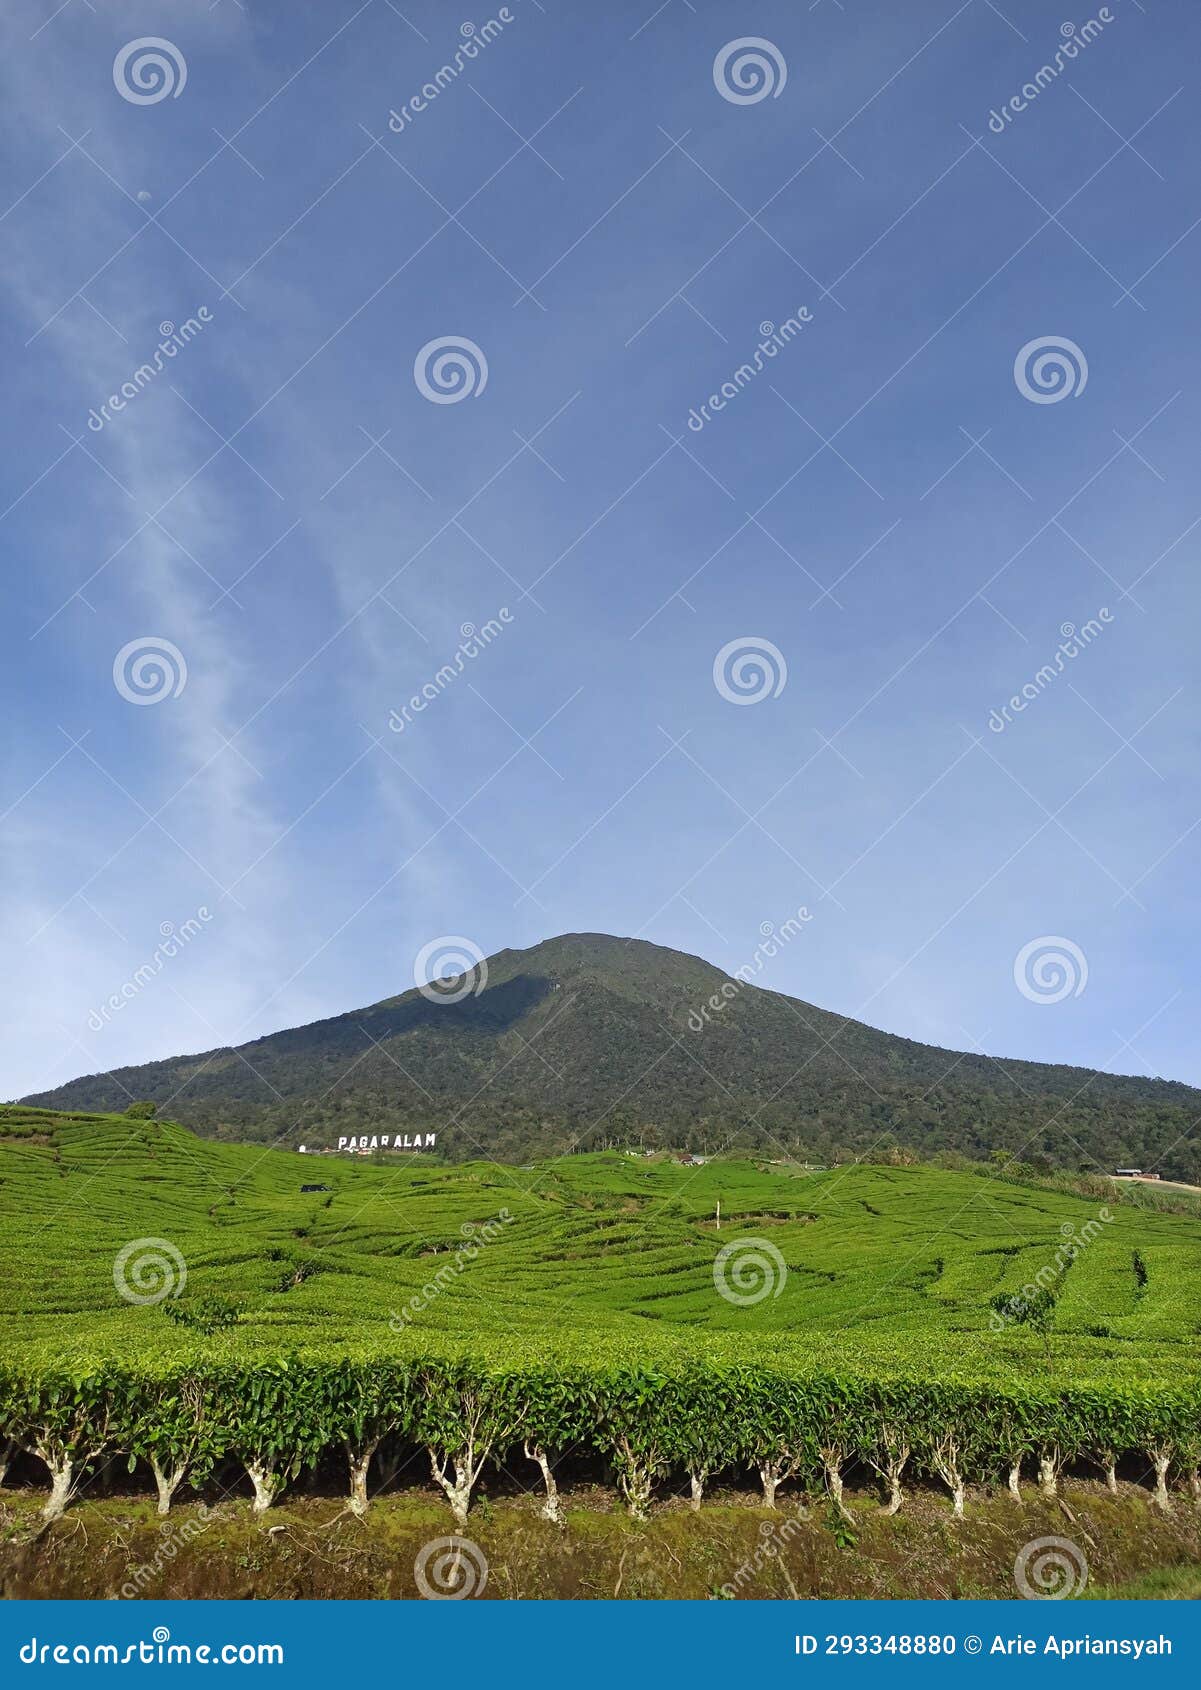 stunning view of mount dempo with a clear blue sky in the background